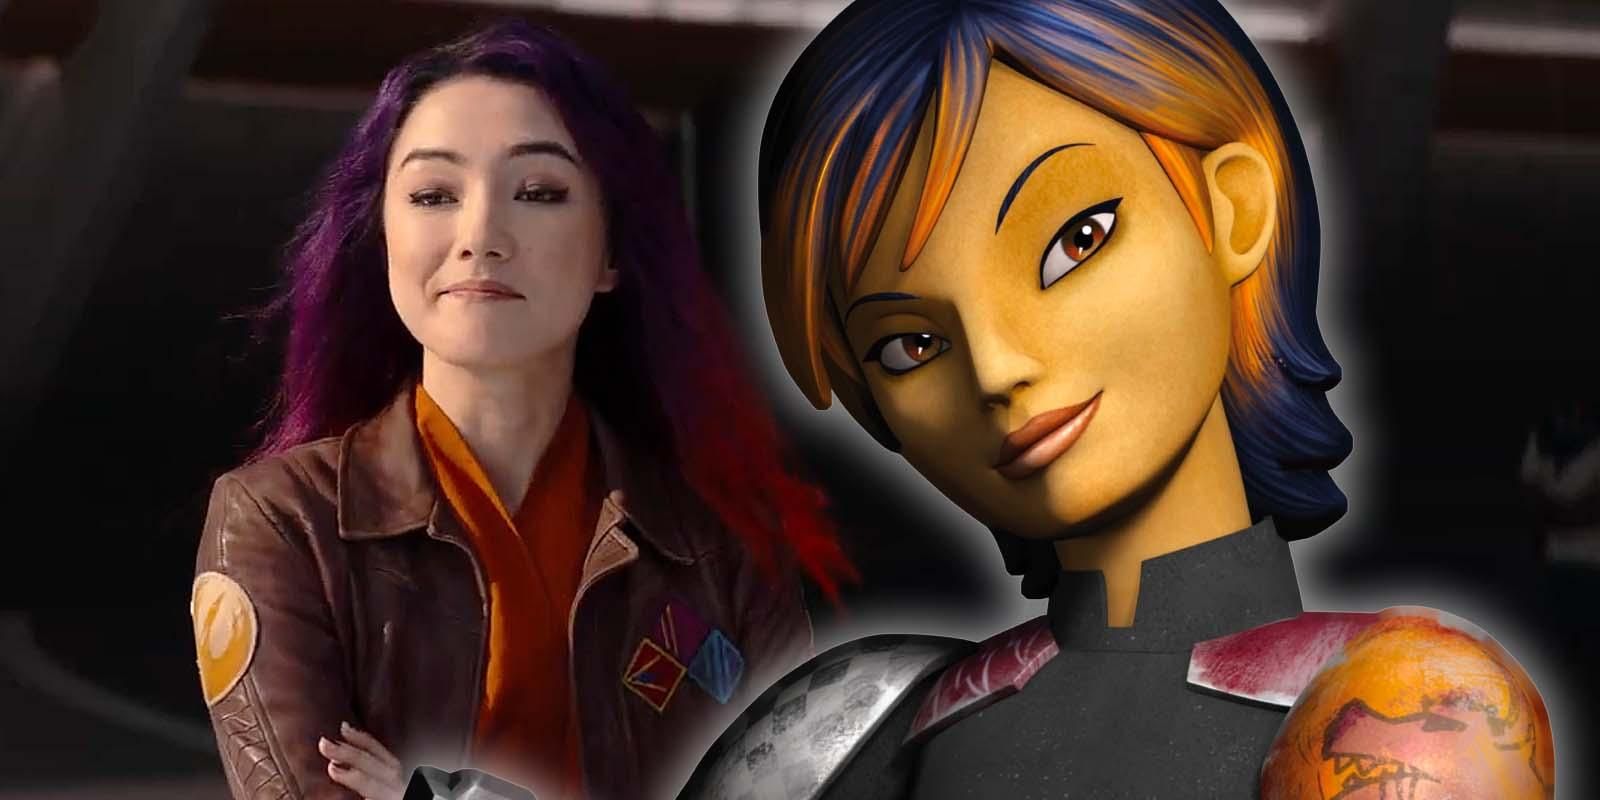 Star Wars Sabine Wren in live-action on Ahsoka and animated on Star Wars Rebels